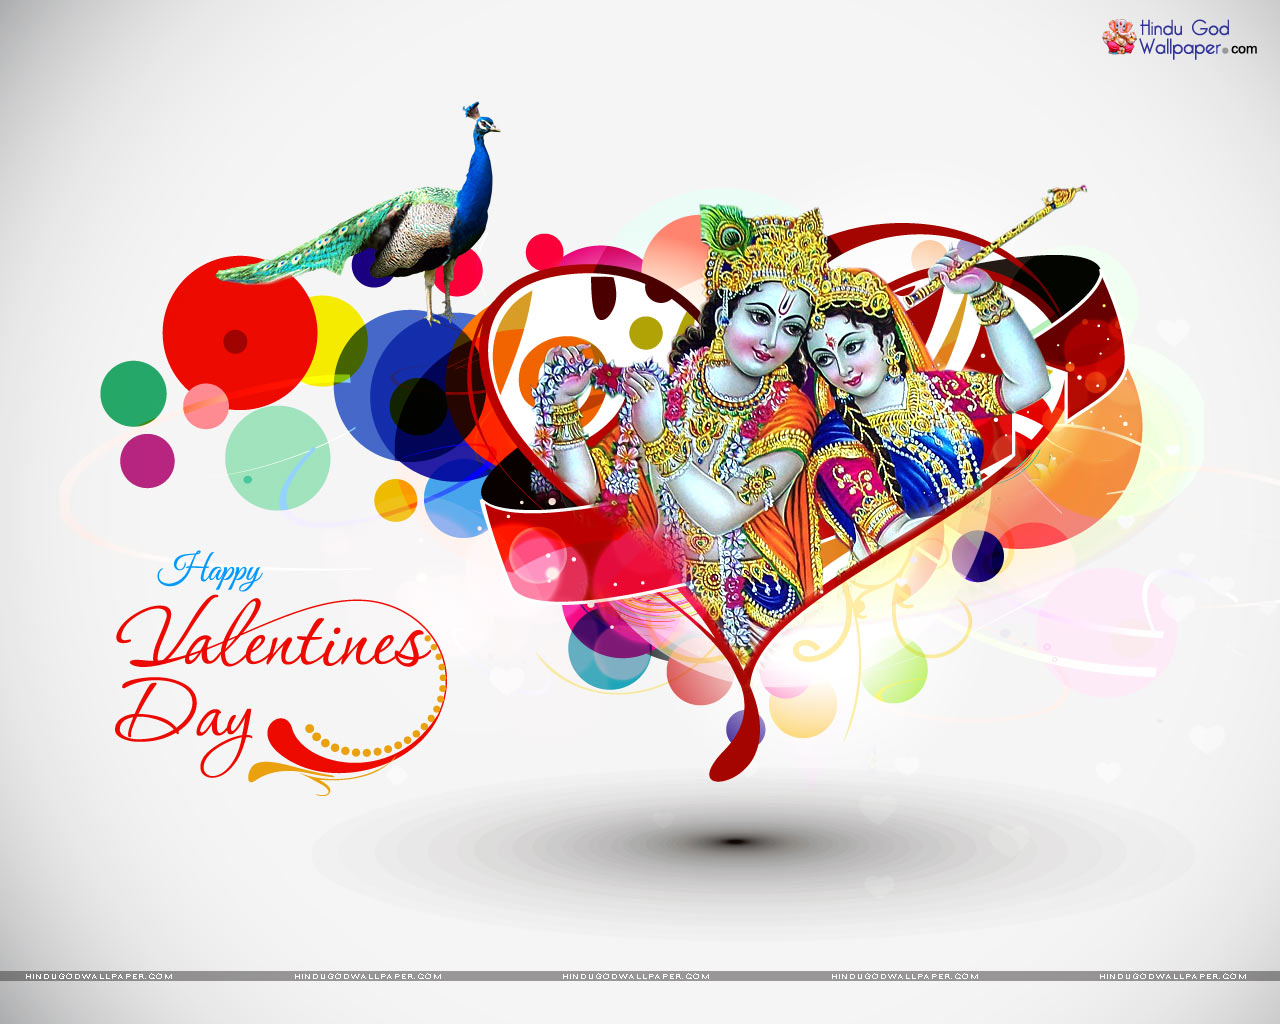 Valentine's Day Wallpapers - Happy Valentine Day Wallpapers